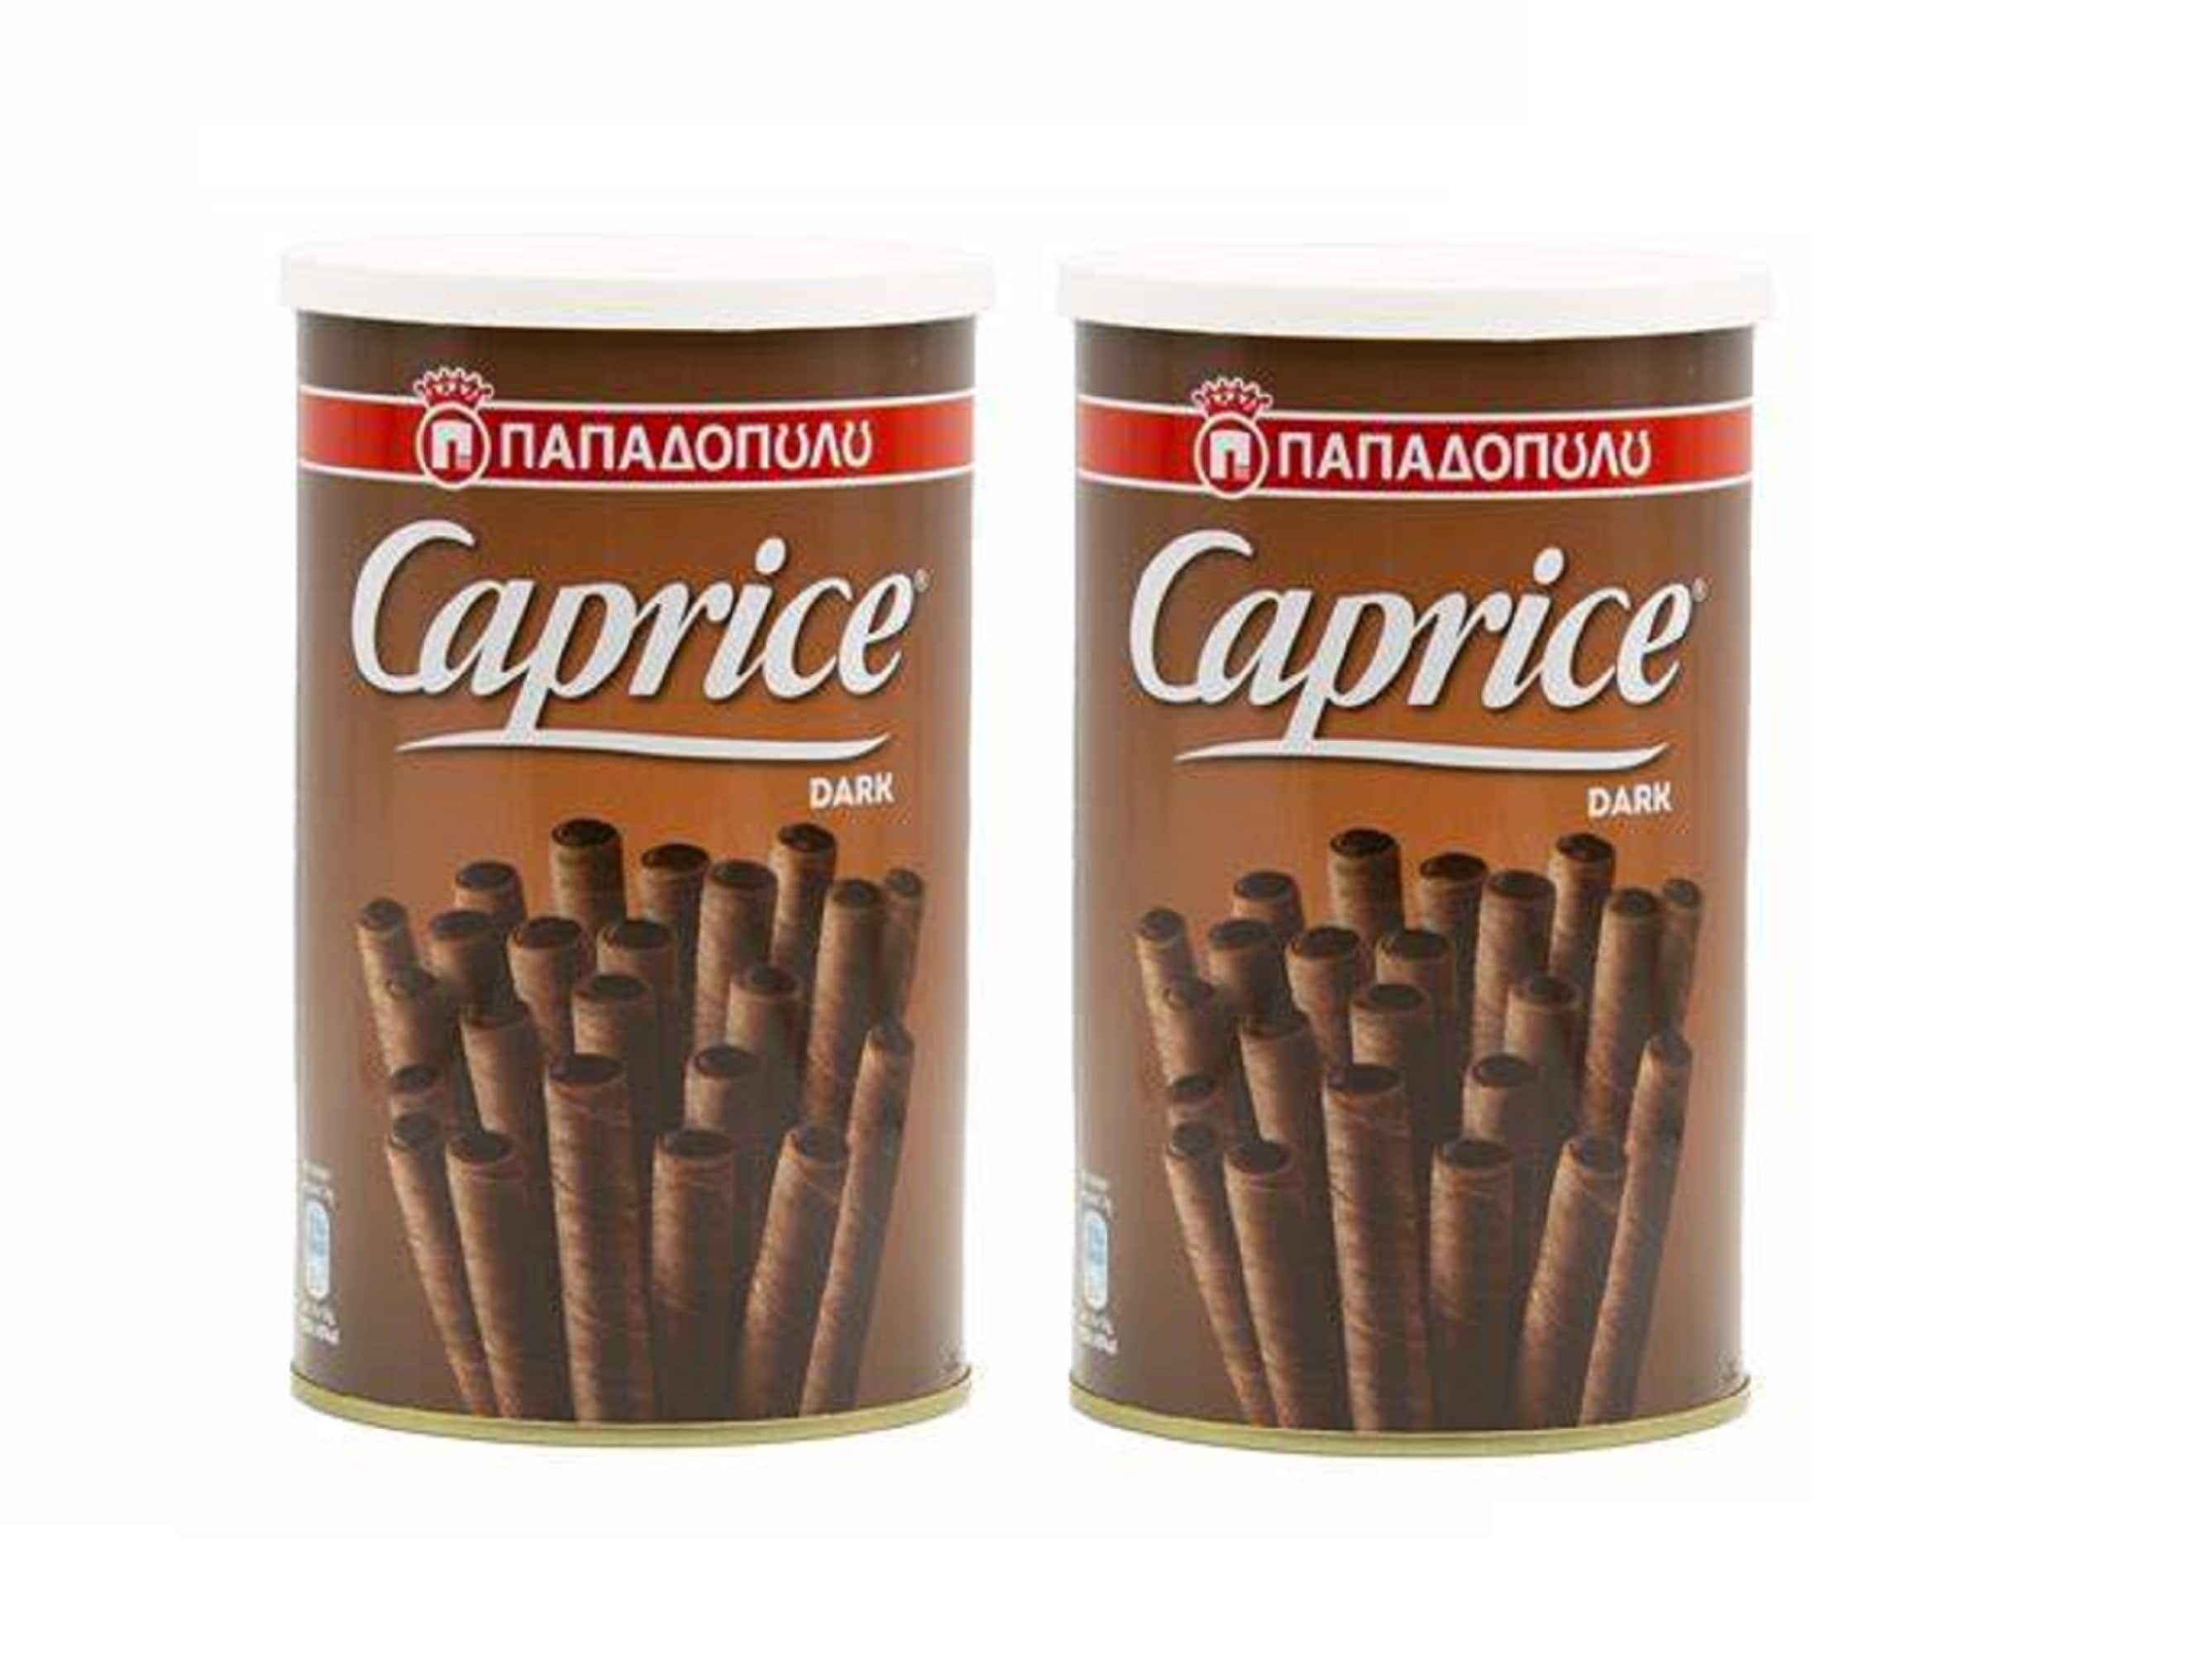 Papadopoulos Greek Caprice Wafers 4 Flavors Thailand